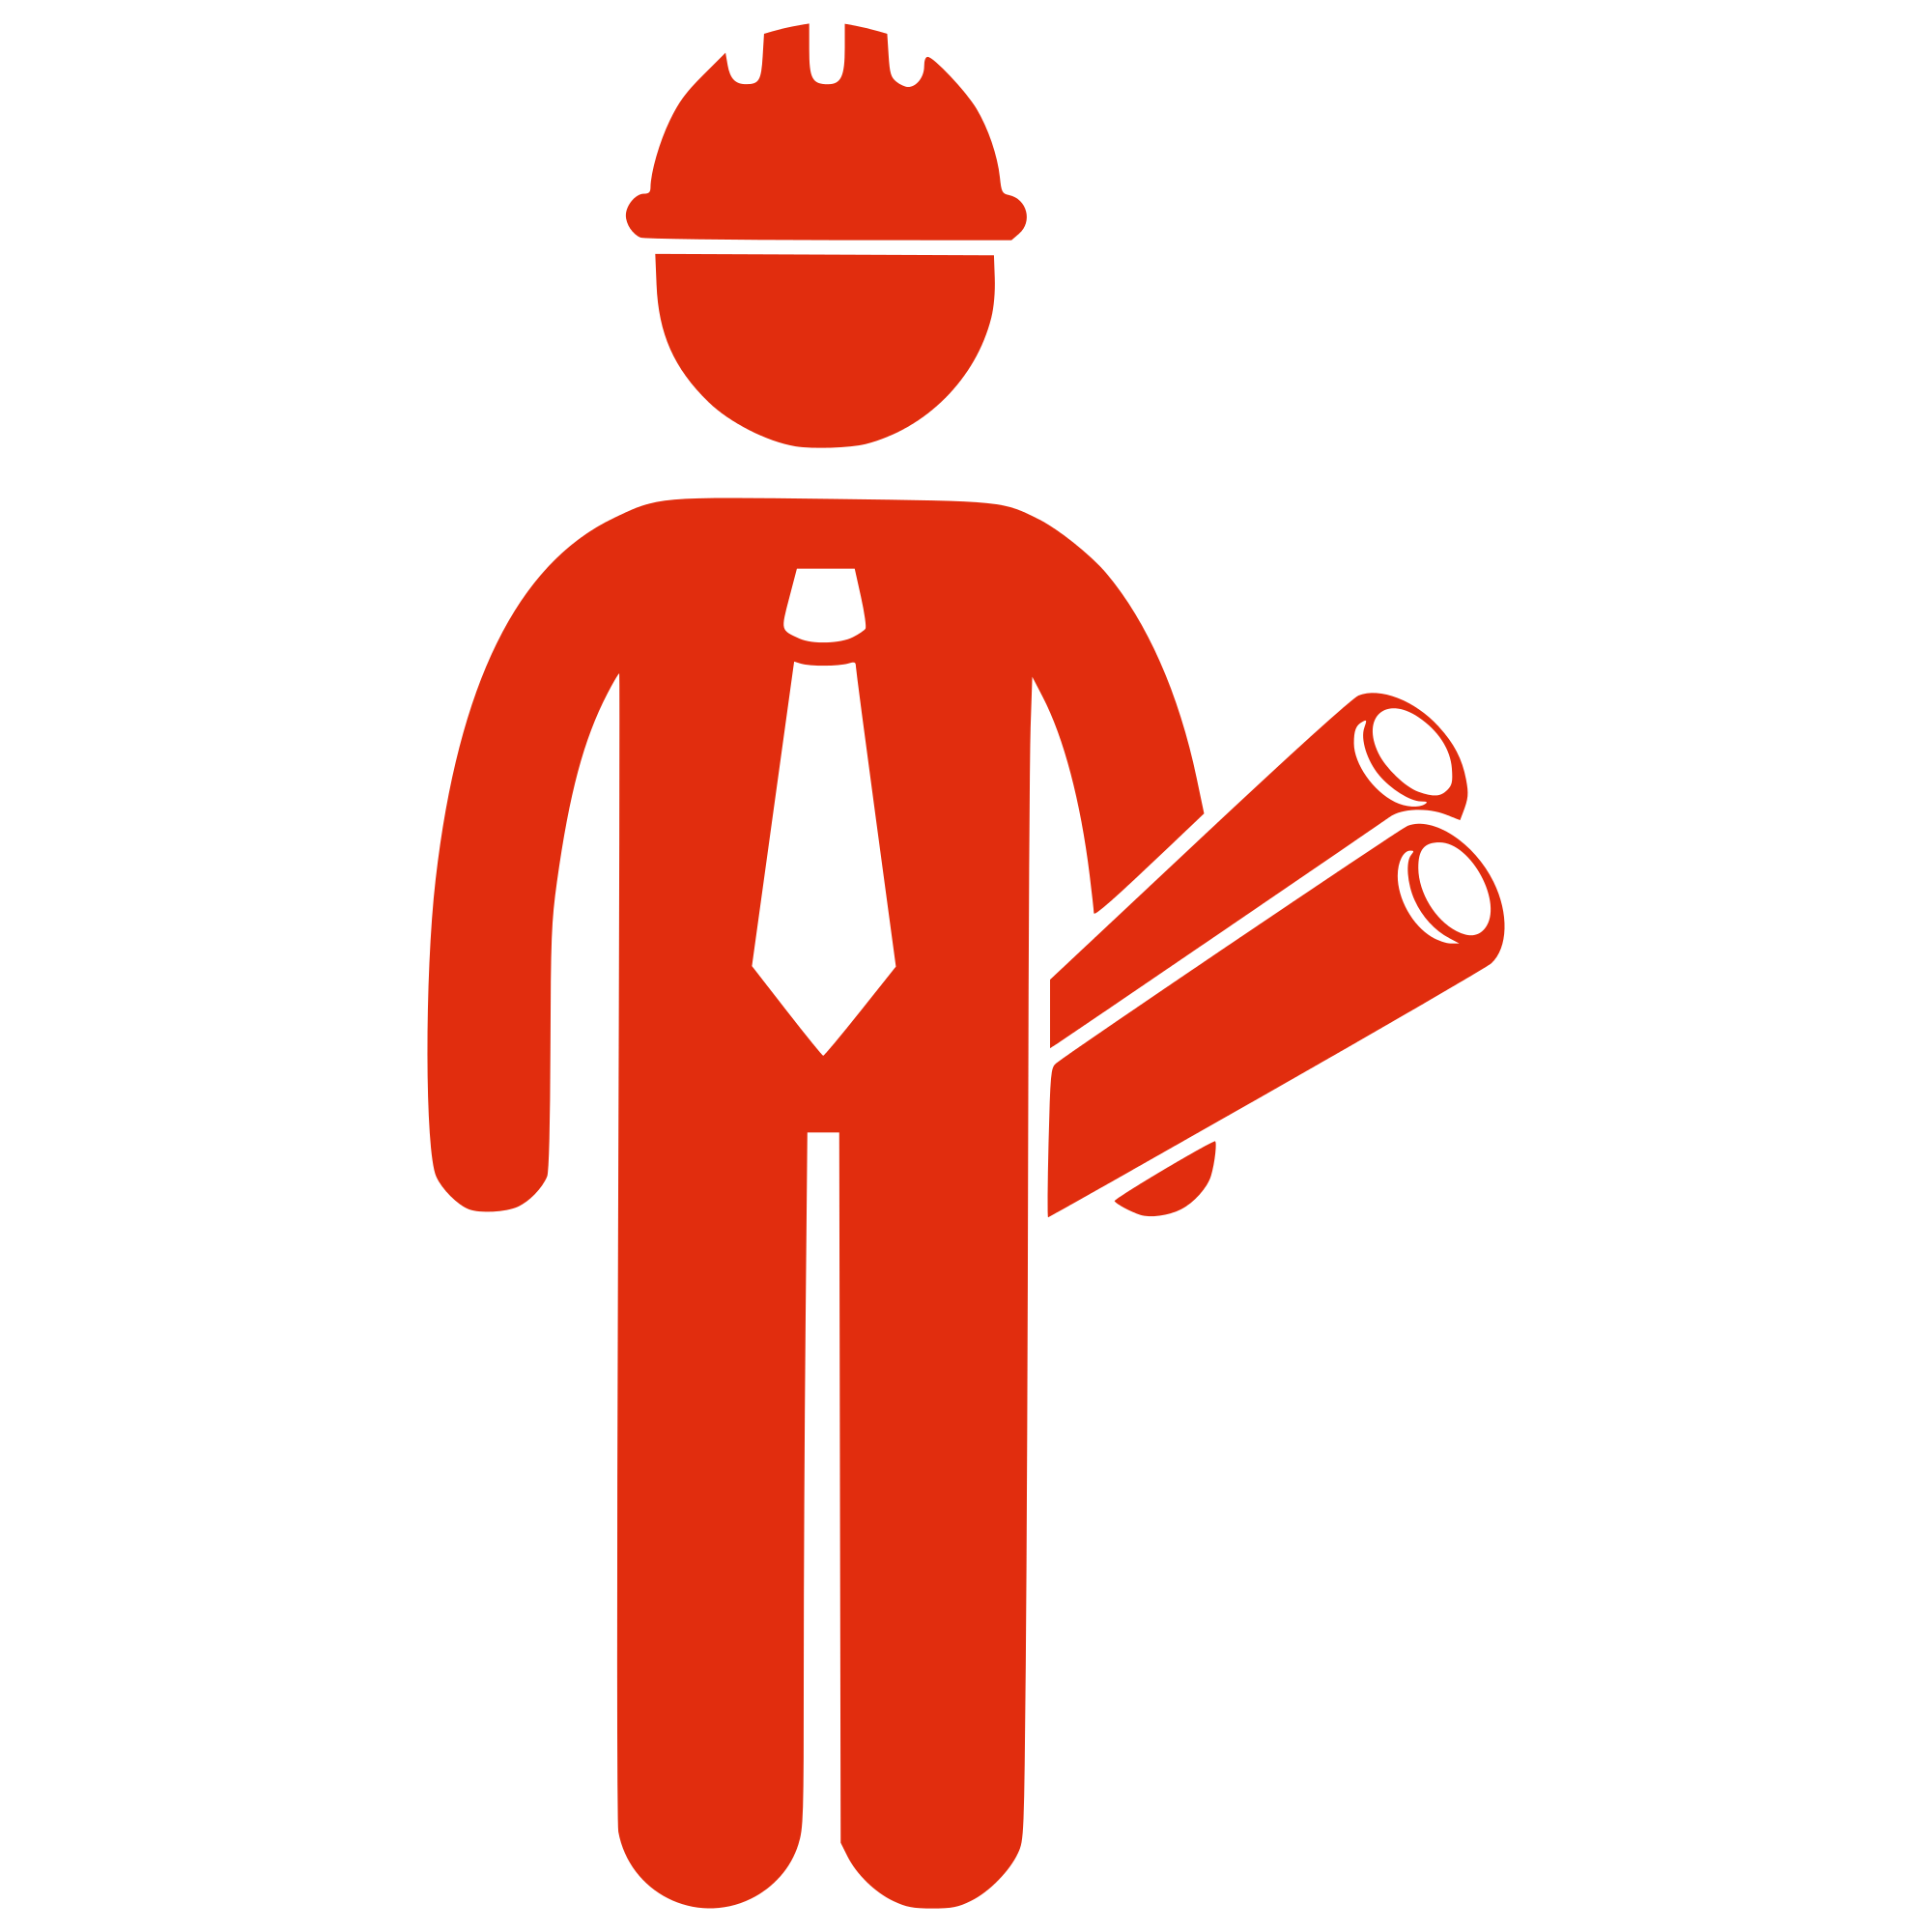 File:Red Silhouette - Construction Worker.svg - Wikimedia Commons